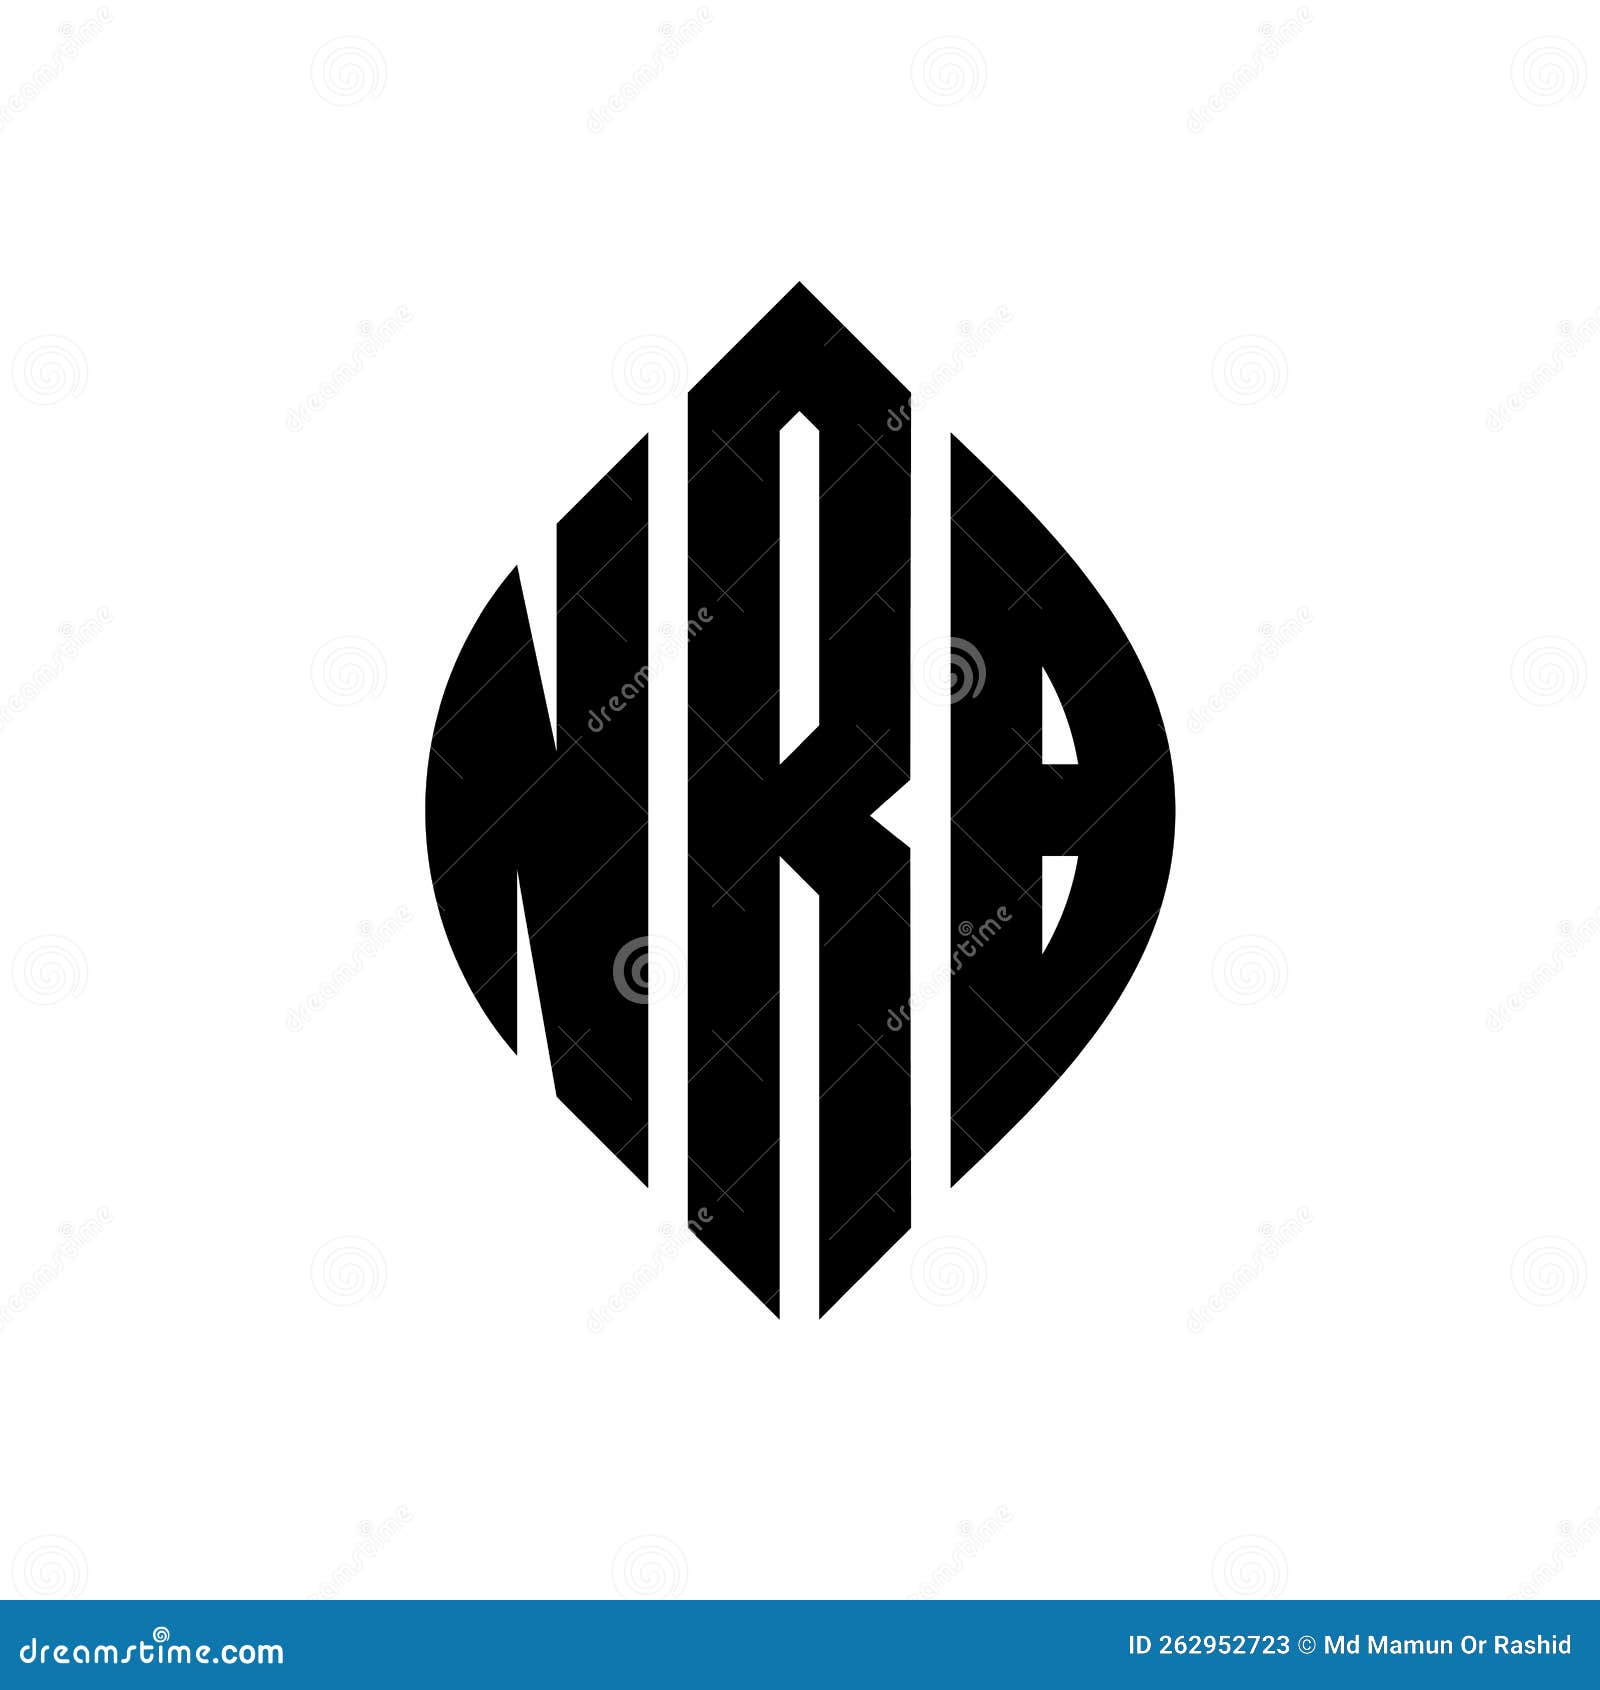 nrb circle letter logo  with circle and ellipse . nrb ellipse letters with typographic style. the three initials form a